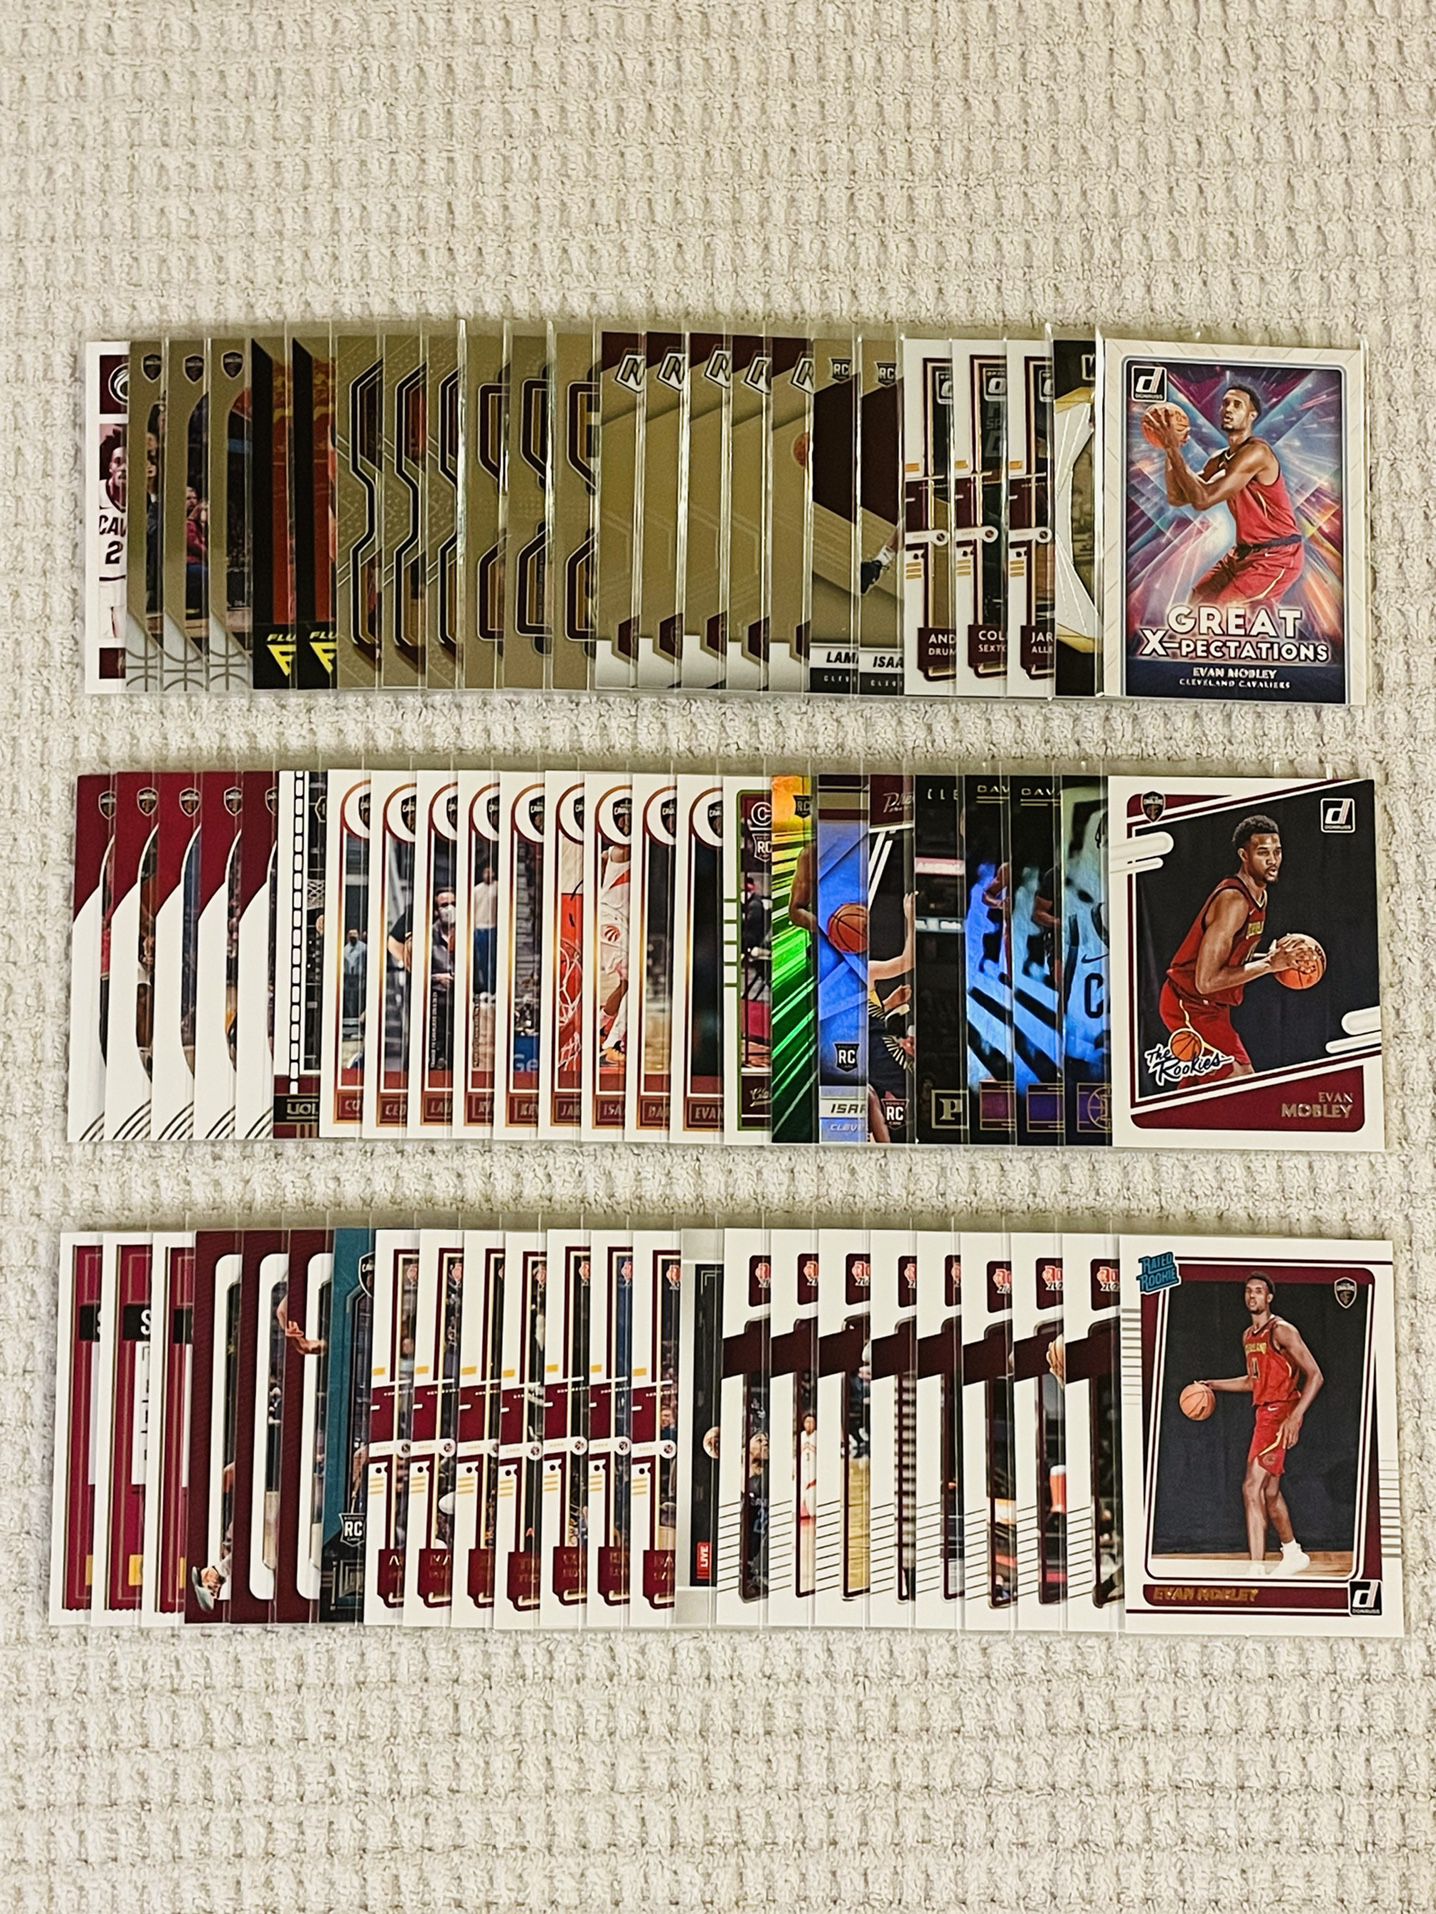 Cleveland Cavaliers 72 Card Basketball Lot!